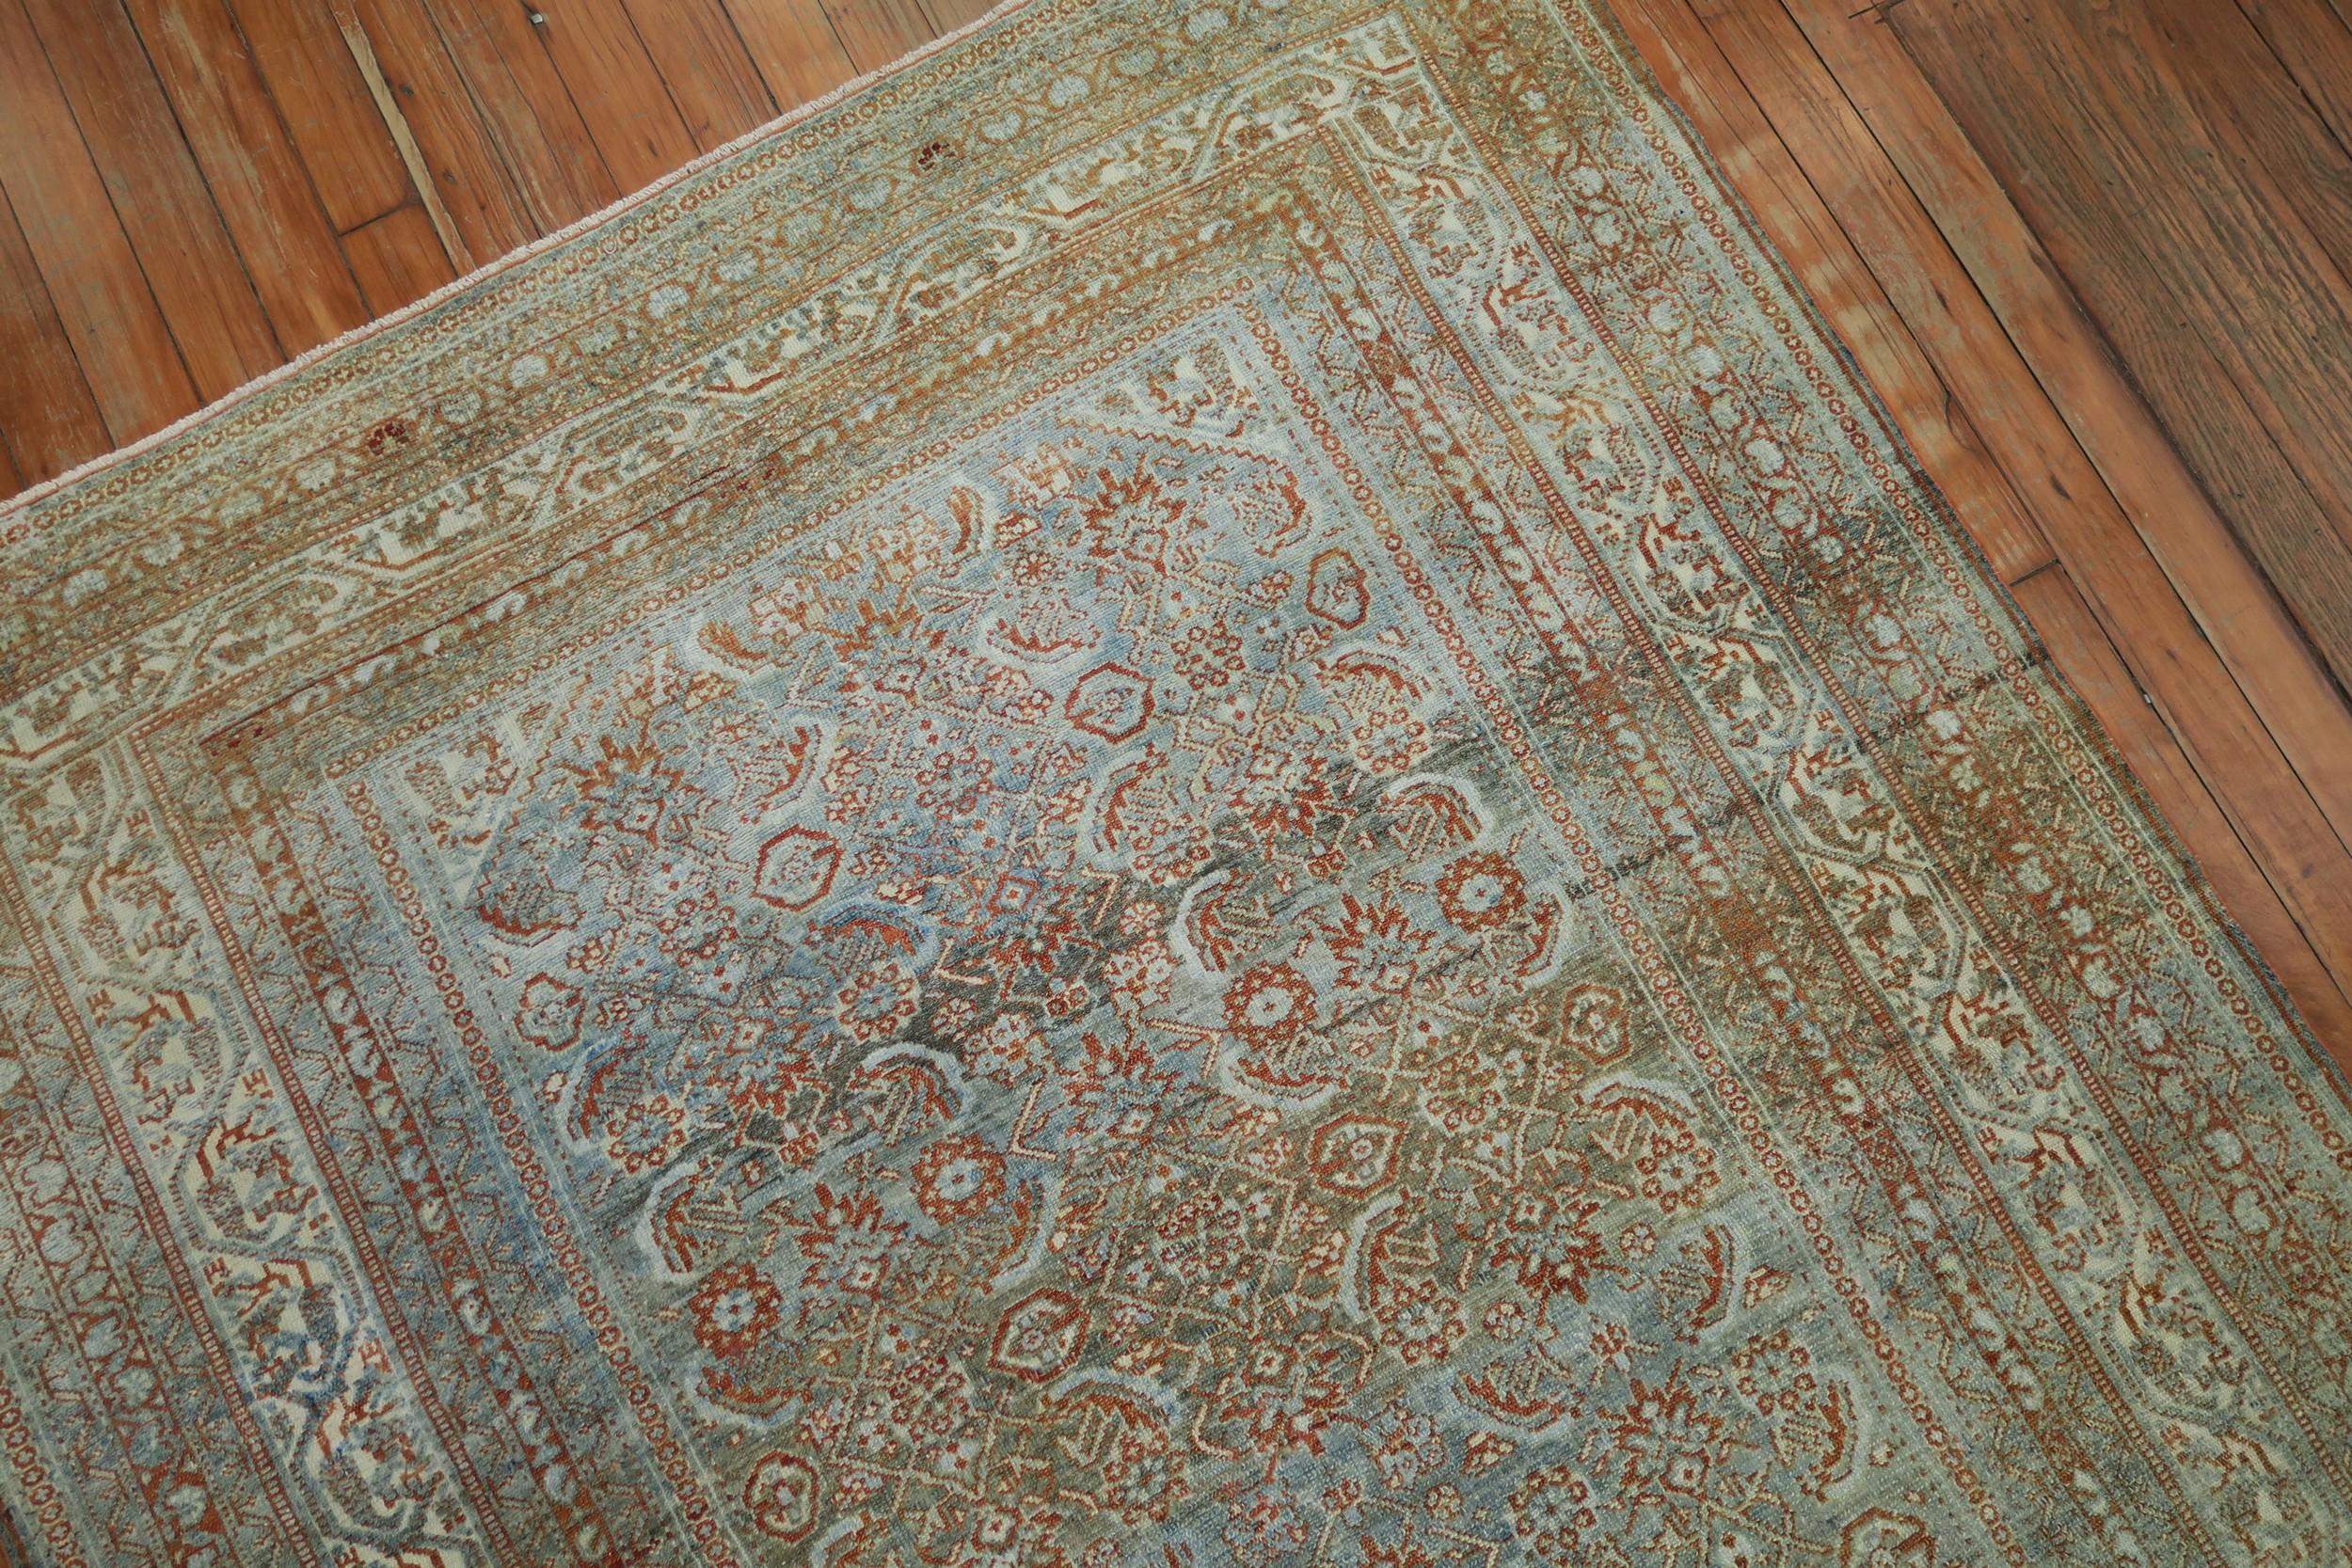 Lovely early 20th century Persian Malayer with a light blue field, accents in terracotta and brown circa 1910

Measures: 4'3” x 6'.

 